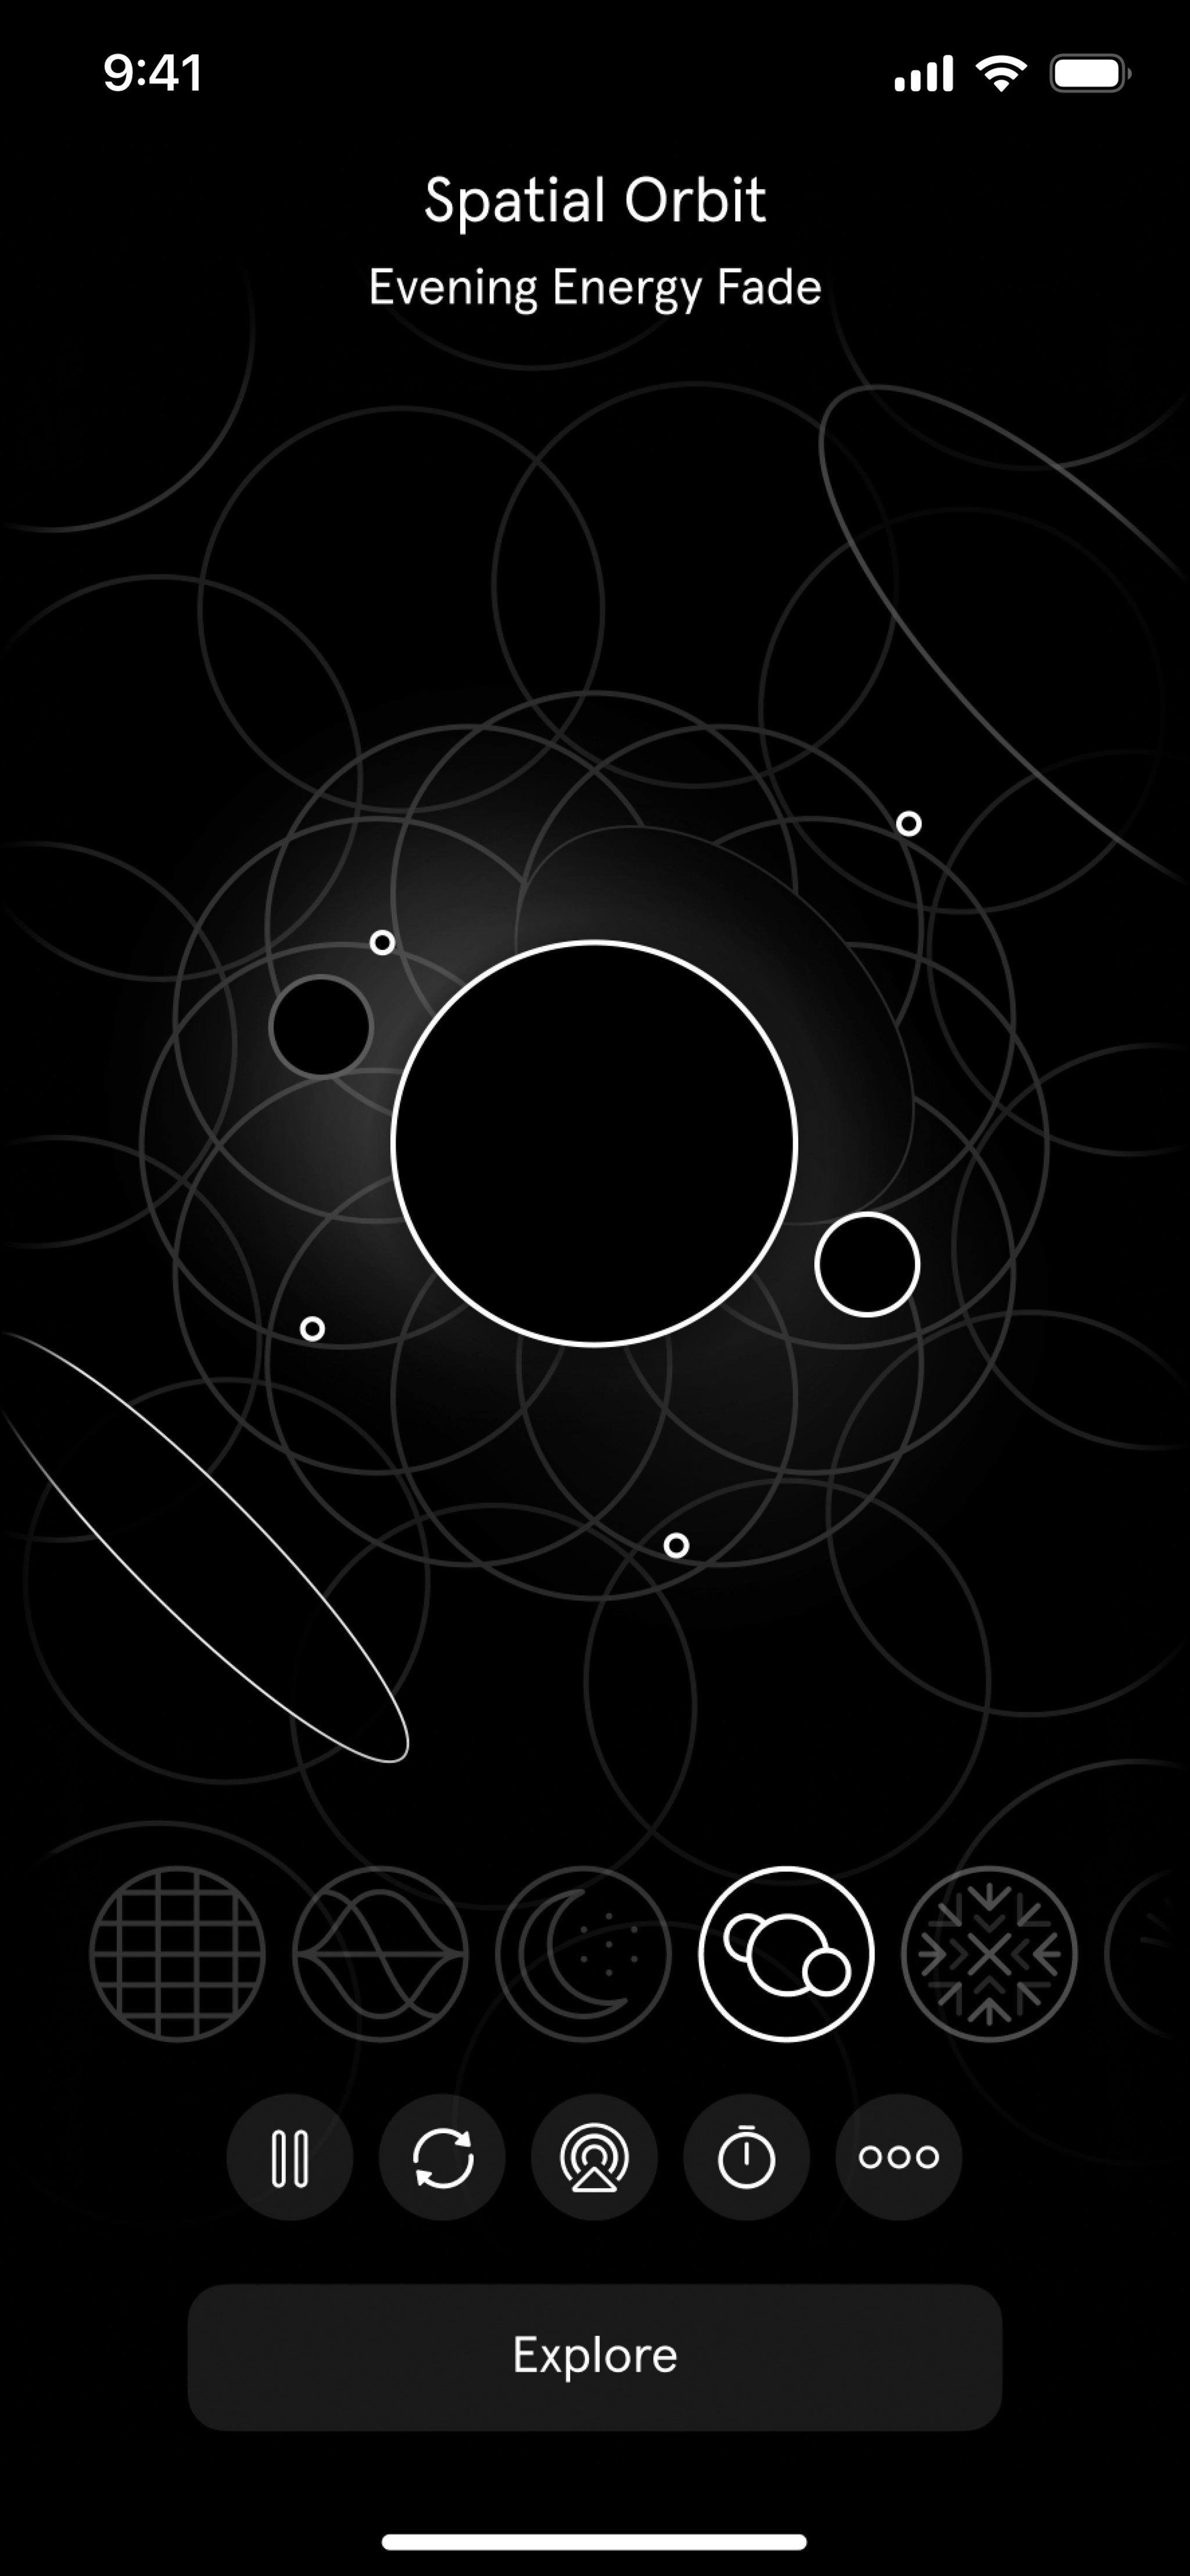 A screenshot of Endel’s Spatial Orbit soundscape, showing a series of abstract black circles with white borders on a largely black background. When the soundscape is playing, the circles move and shift with the sounds.